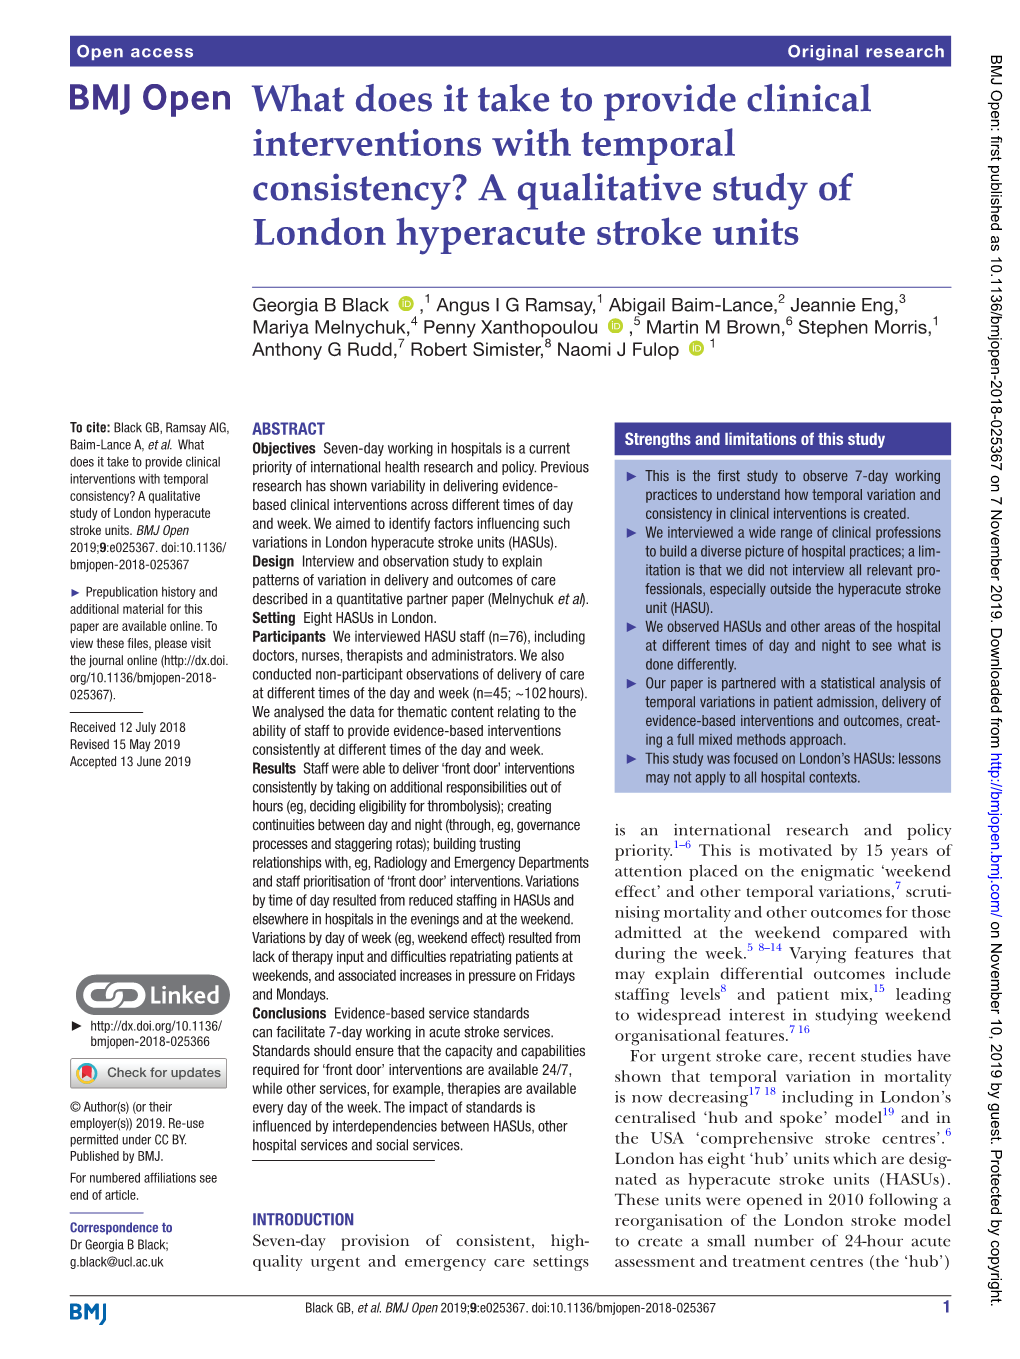 What Does It Take to Provide Clinical Interventions with Temporal Consistency? a Qualitative Study of London Hyperacute Stroke Units